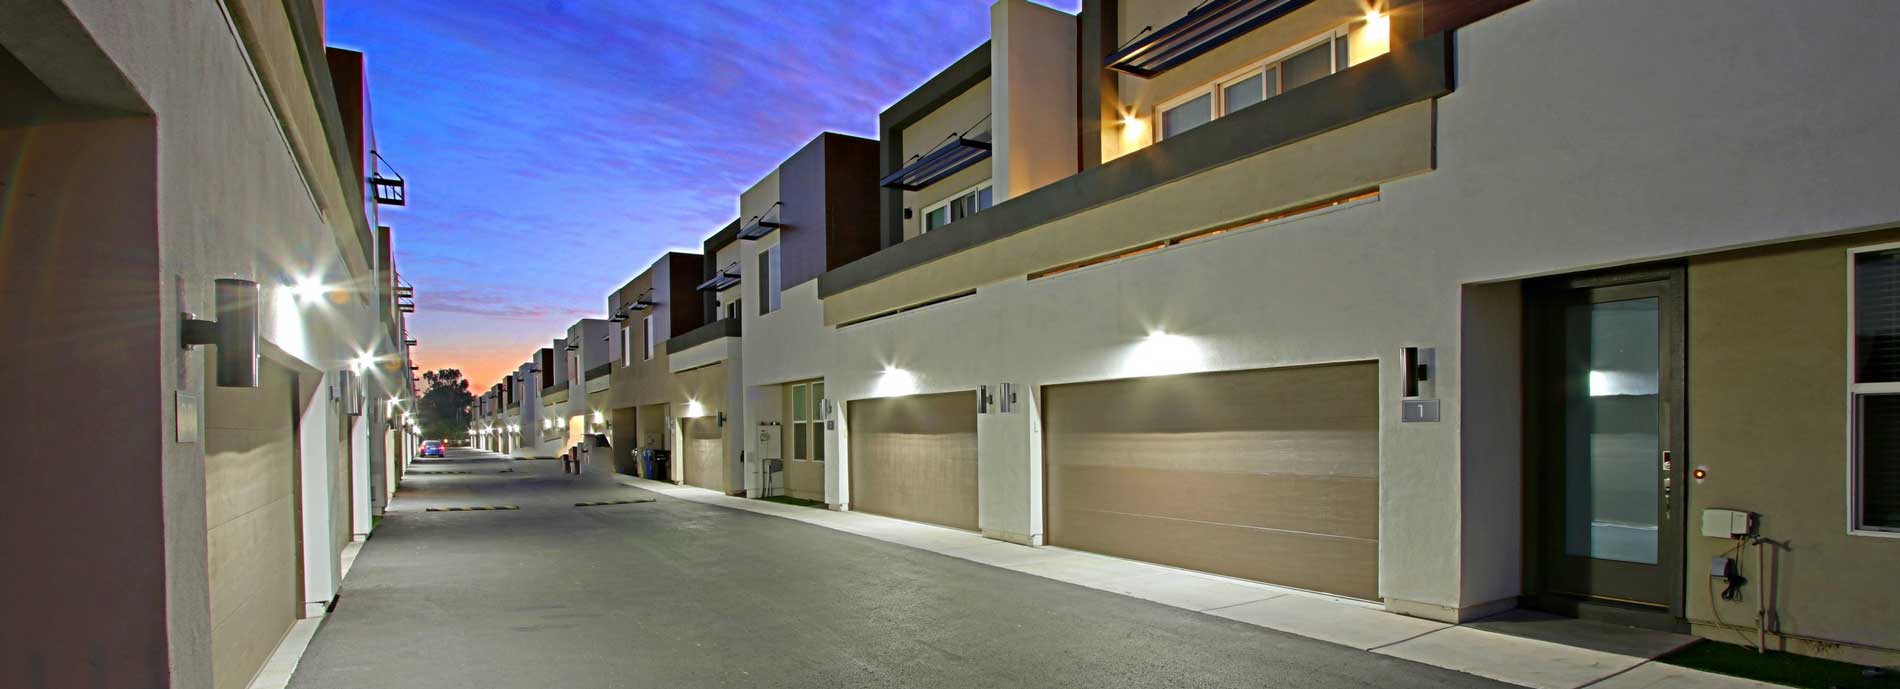 Luxana Apartments with Attached Garages